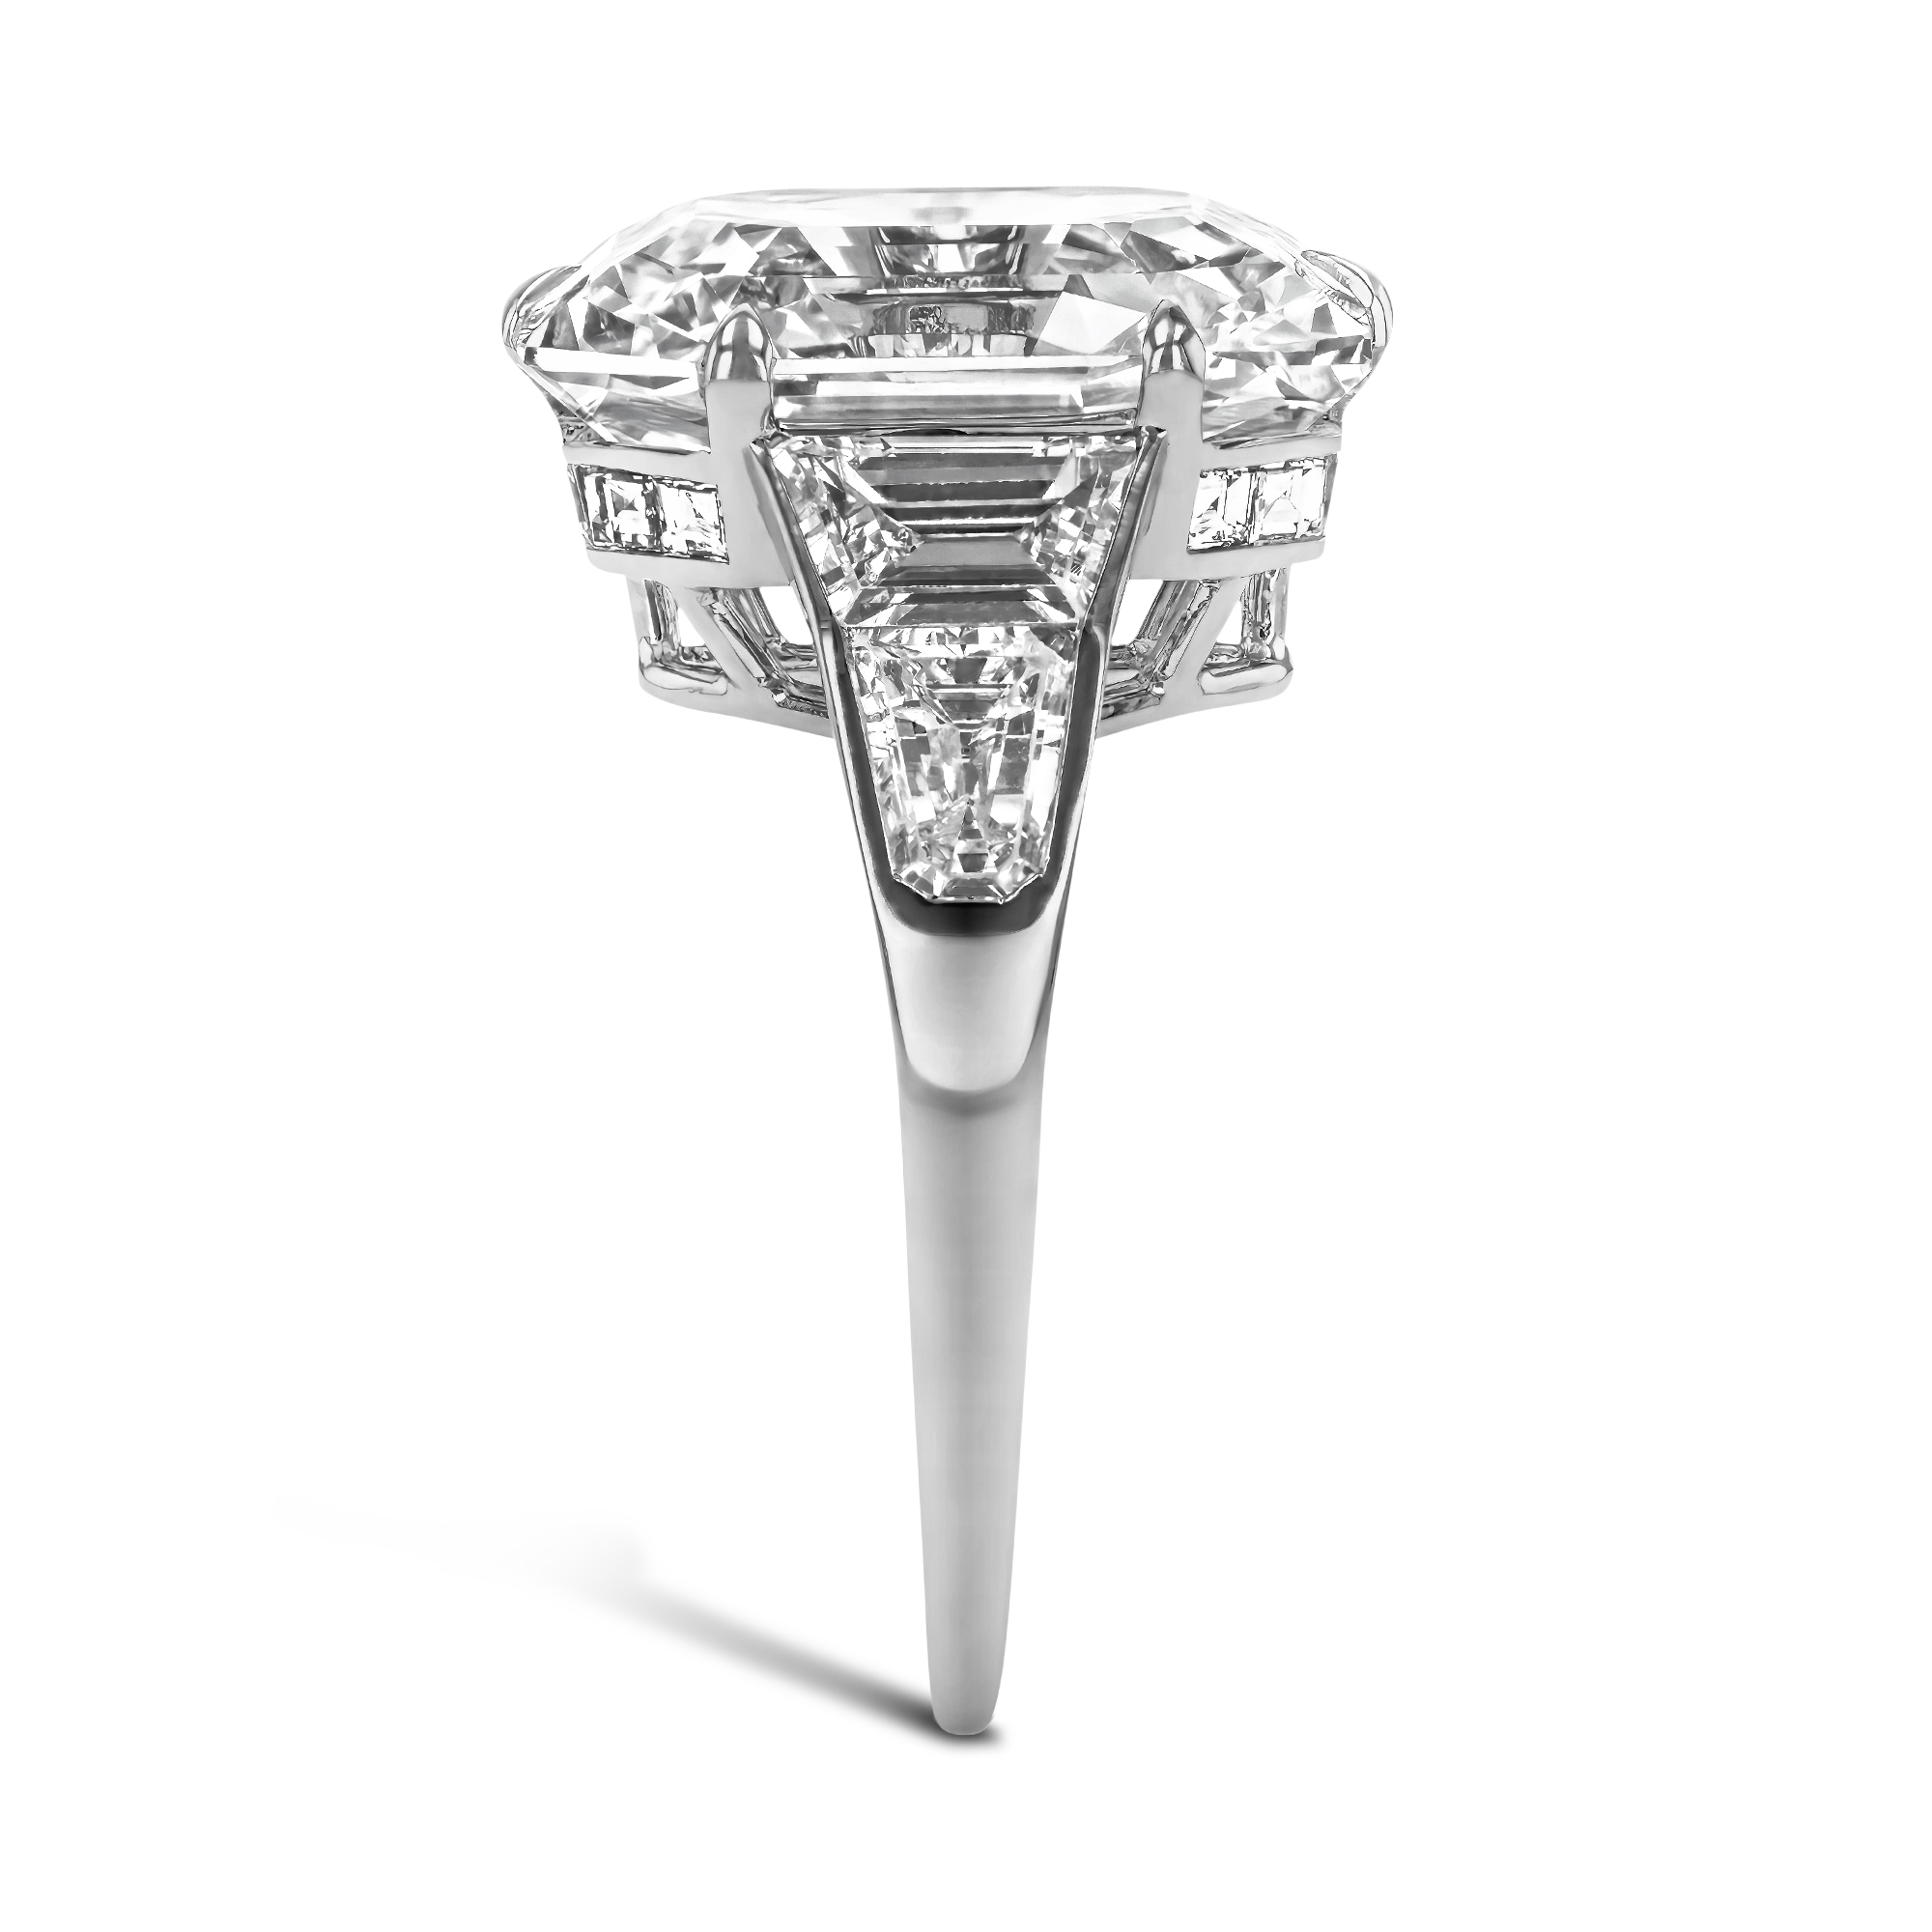 Exceptional Art Deco Asscher cut diamond ring by the House of Chaumet Emerald Cut, Four Claw Set_4